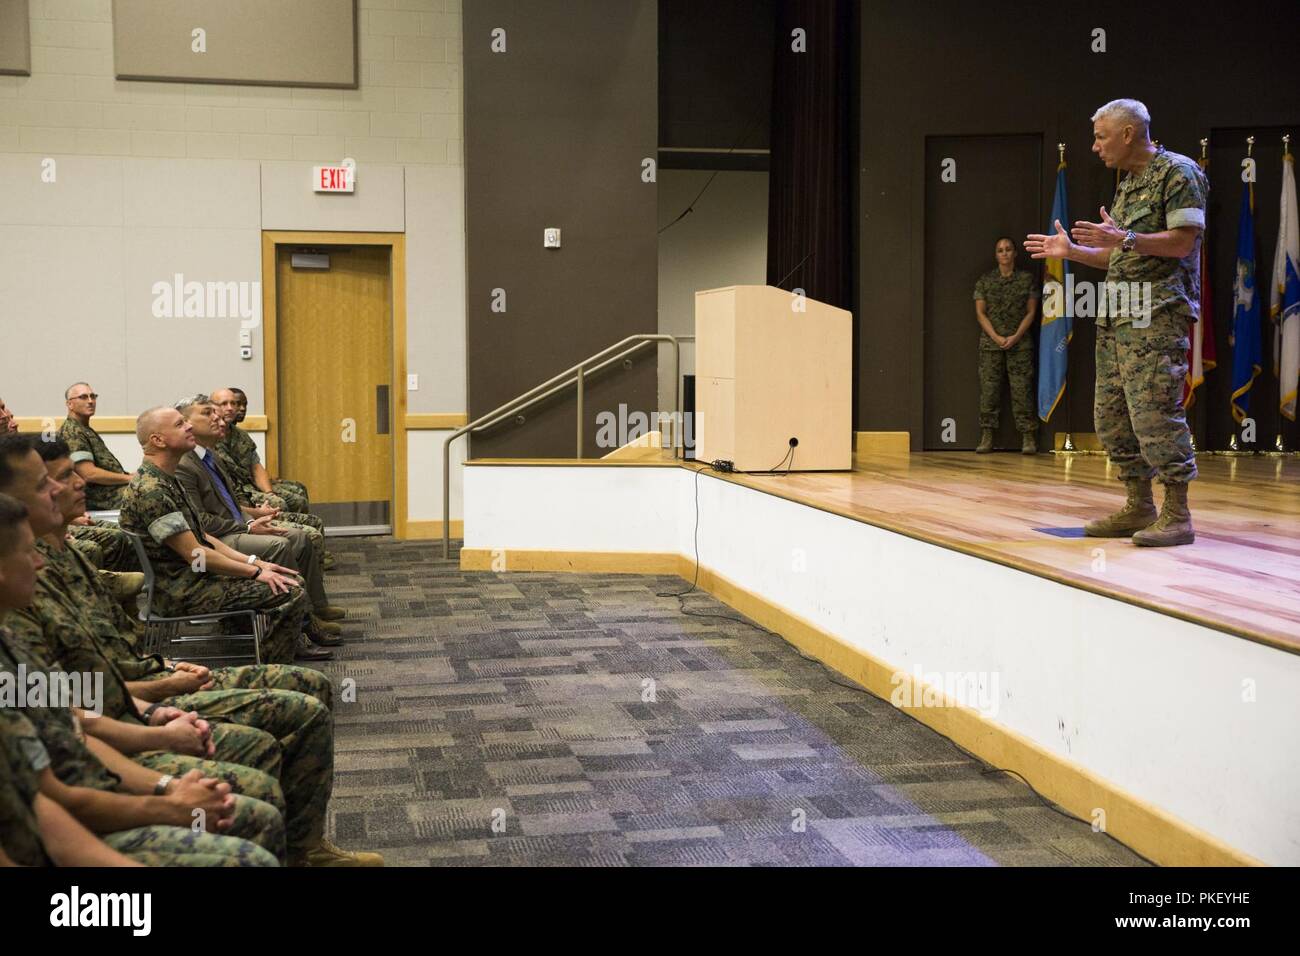 Lt. Gen. Rex. C. McMillian, commander of Marine Forces Reserve and Marine Forces North, addresses Maj. Gen. Michael F. Fahey, outgoing commander of Force Headquarters Group, during the change of command ceremony at the Federal City Auditorium, New Orleans, Aug. 3, 2018. While addressing the attendees, McMillian expressed his gratitude for all the hard work and dedication Fahey gave to FHG during his time as the commander from 2016-2018. Stock Photo